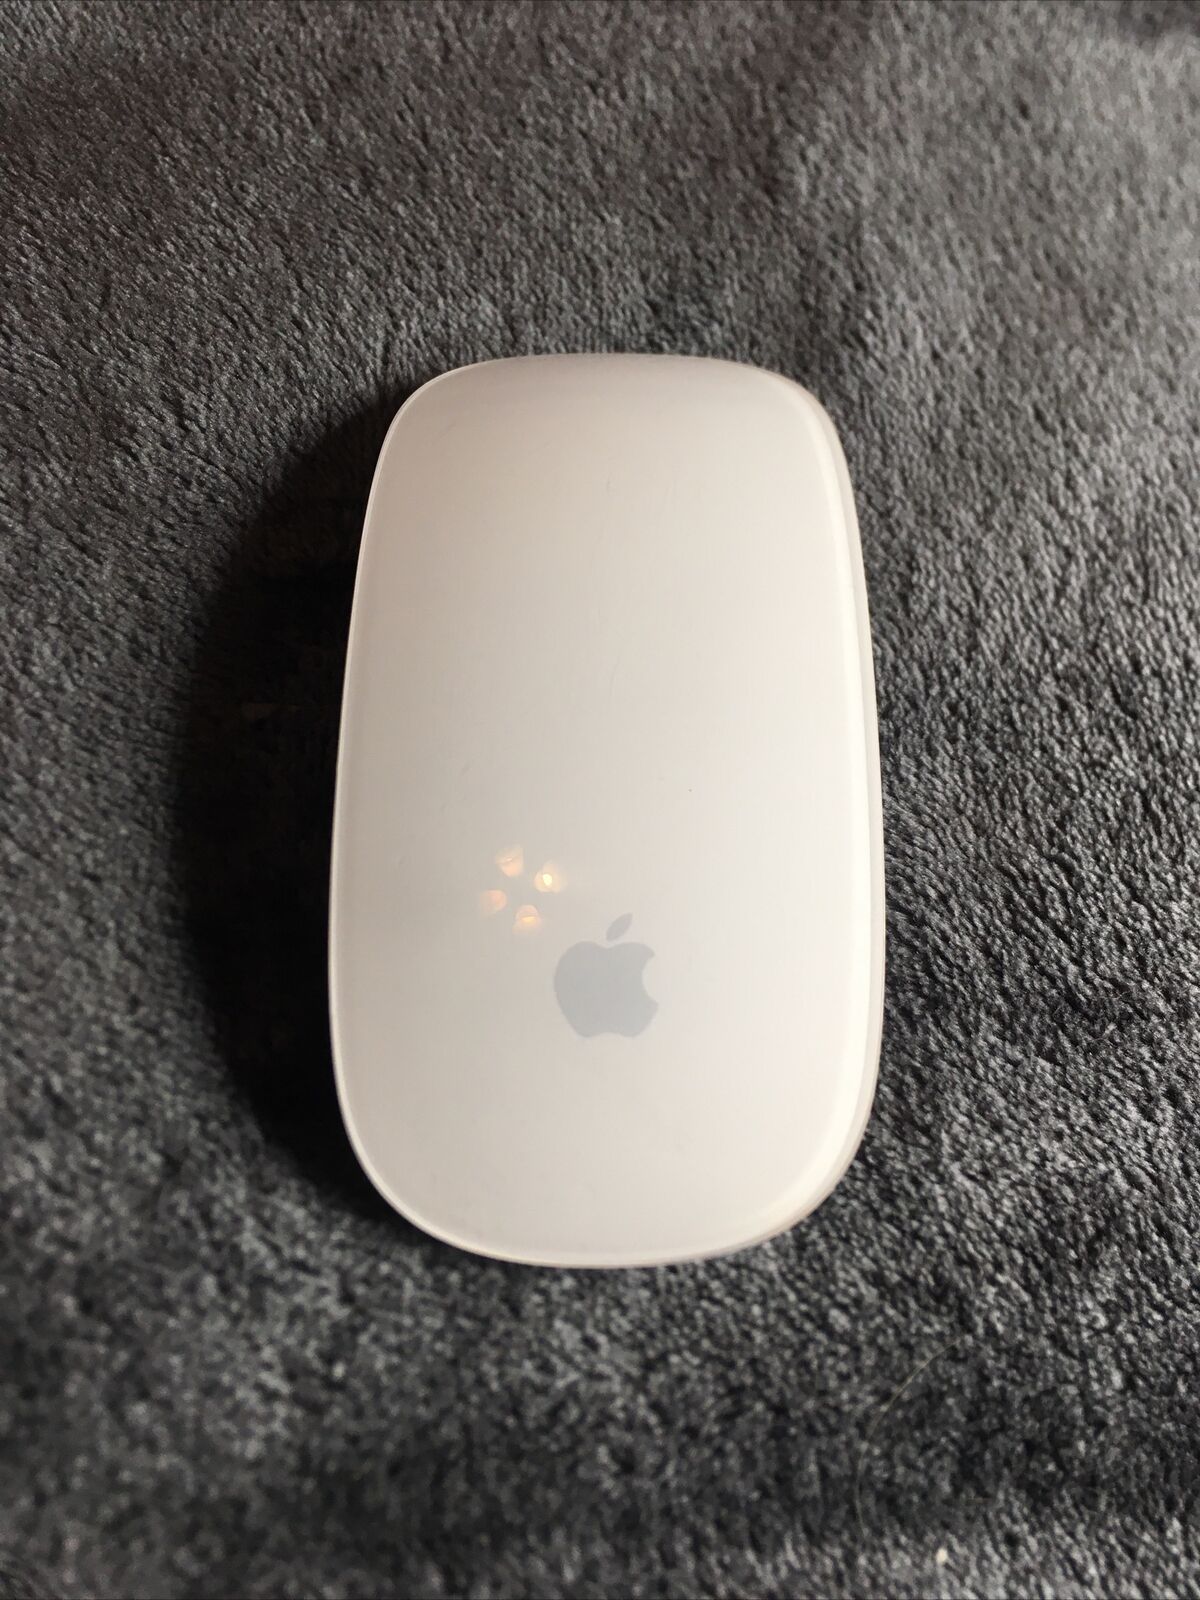 Apple A1296 (MB829LLA) Wireless Magic Mouse OEM - Genuine Missing Battery Cover